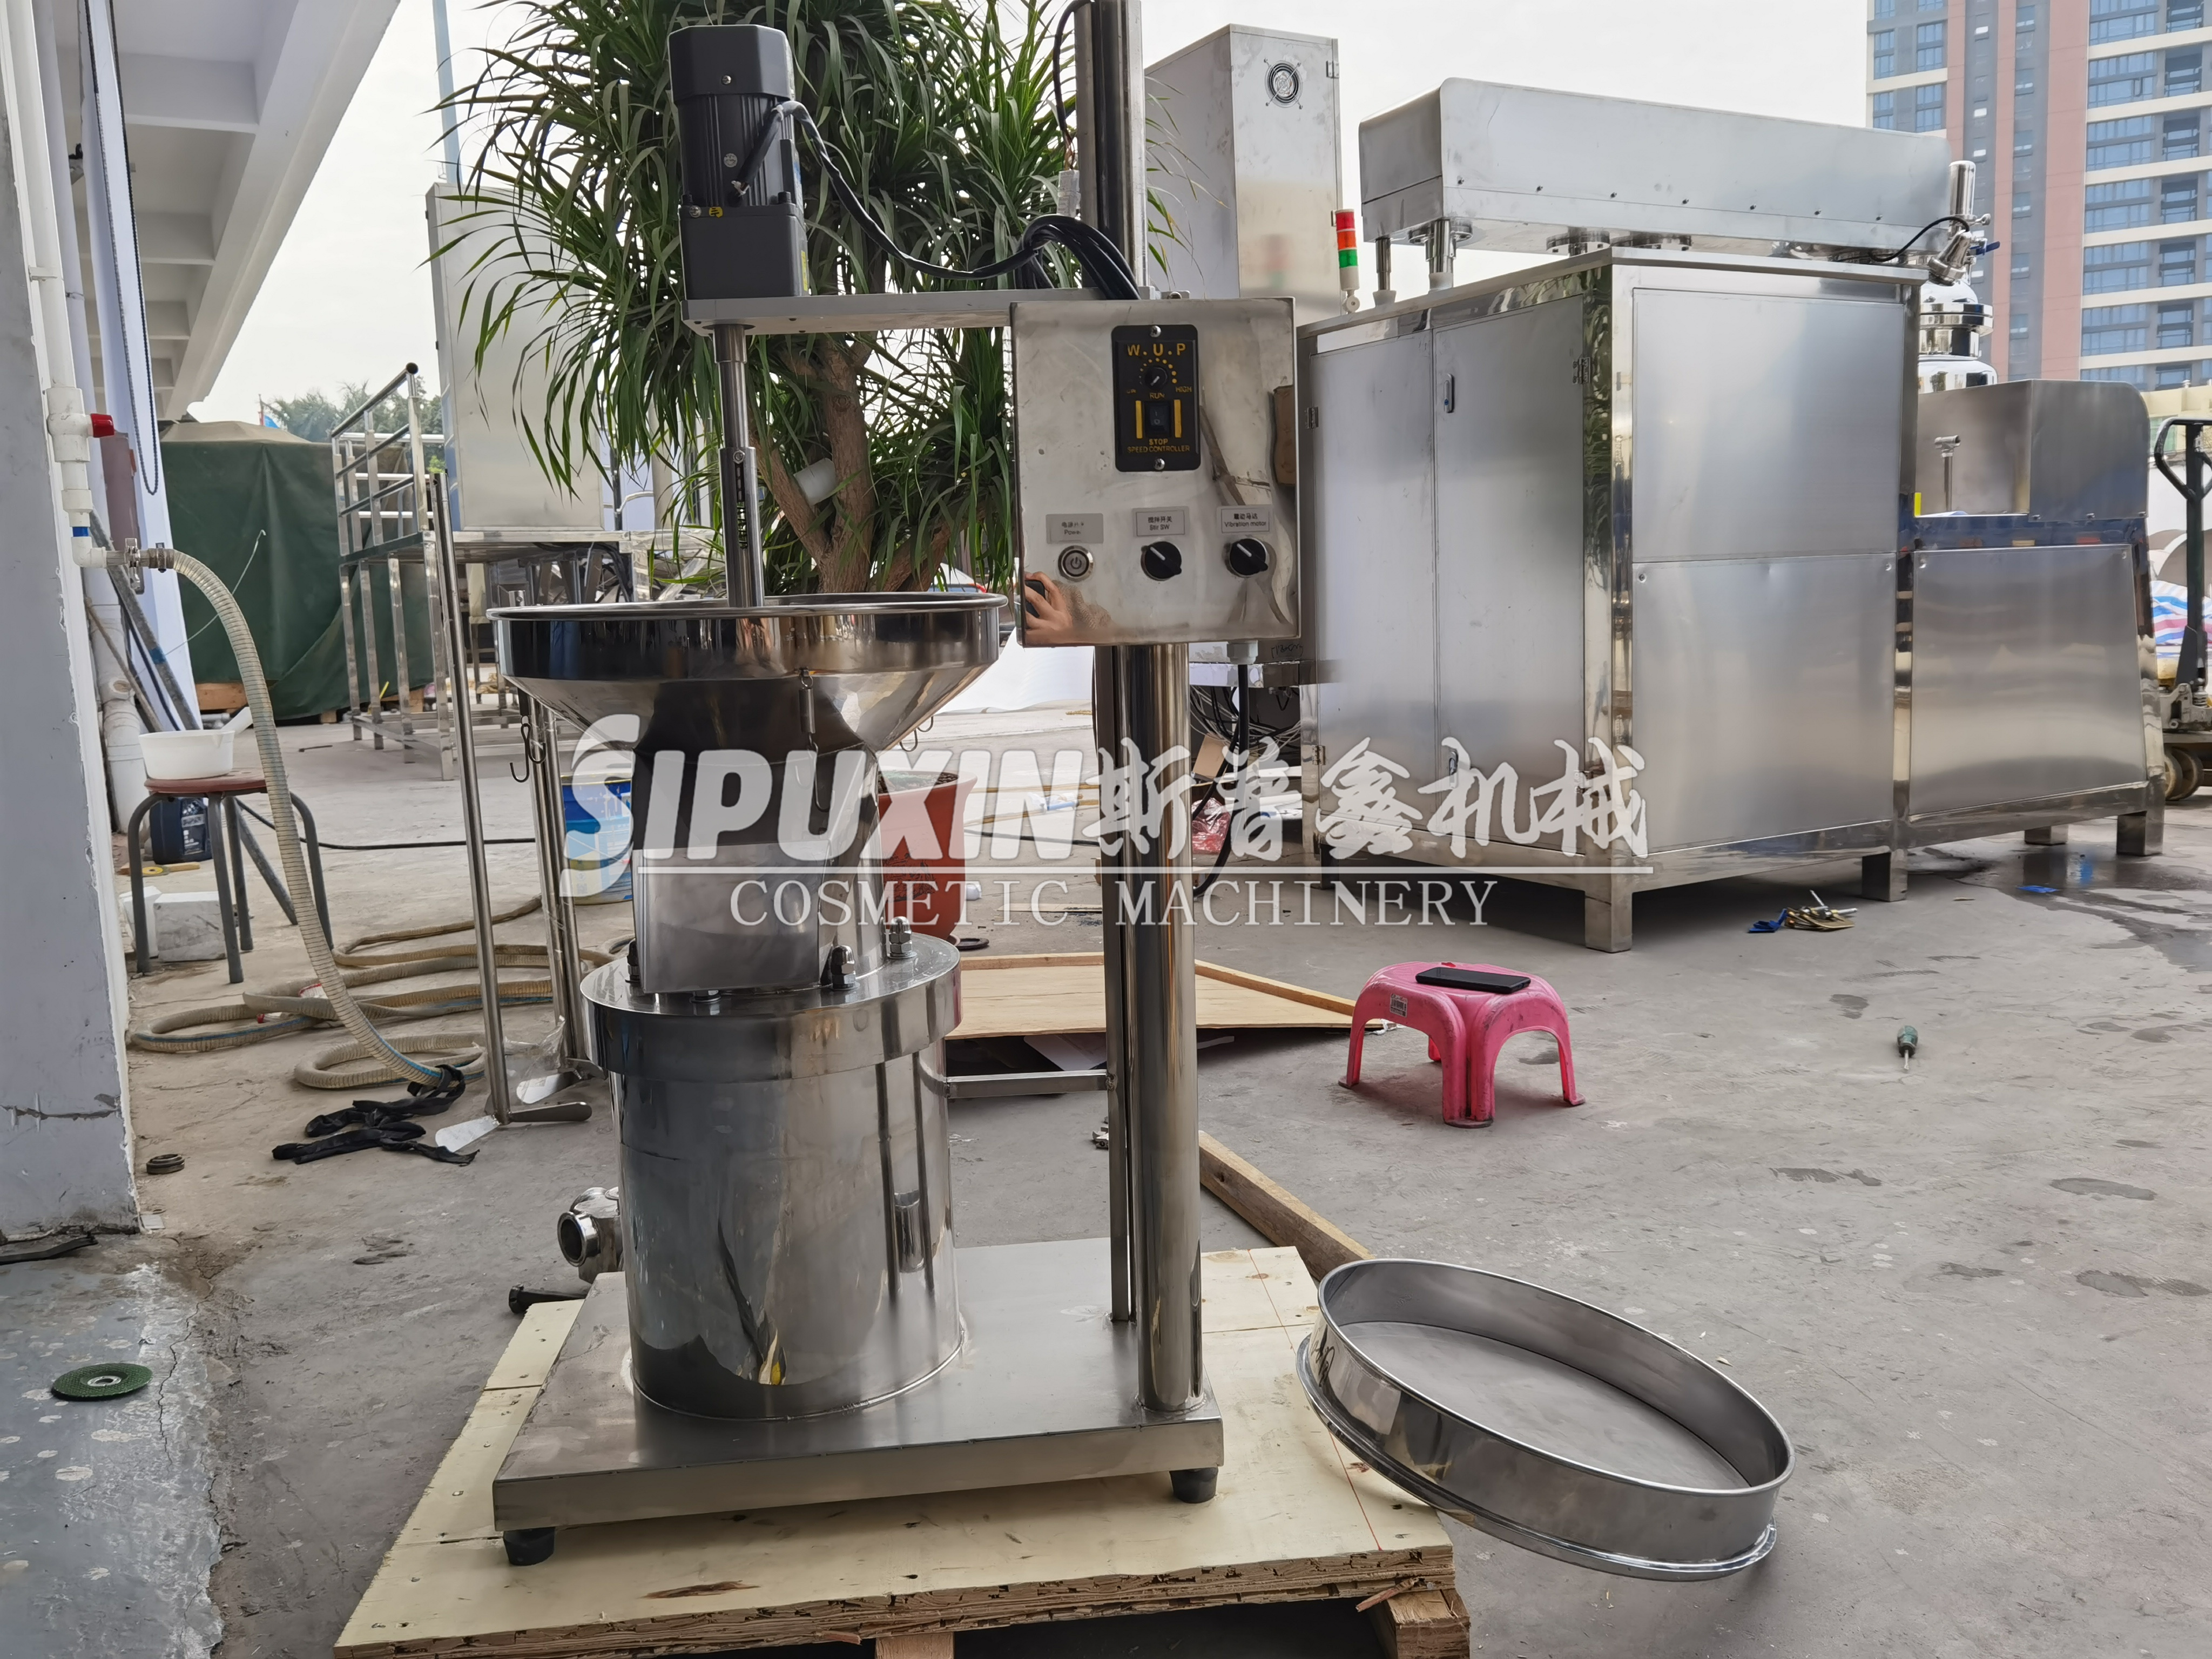 Sipuxin Foundation Sieve Machine for Cosmetic Powder